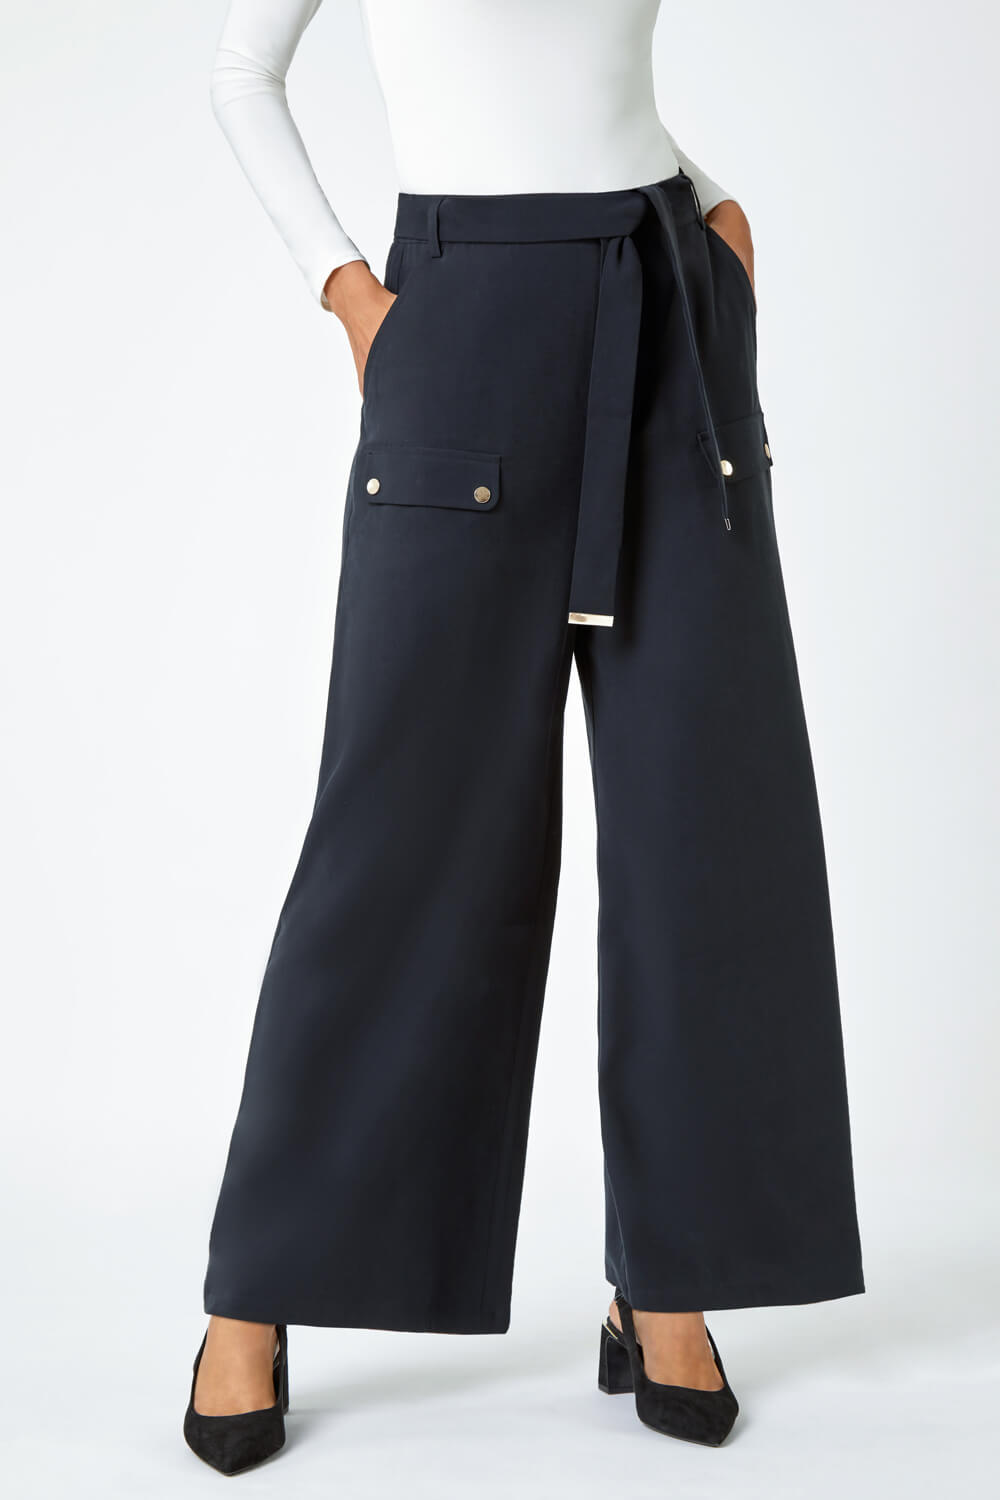 Black Wide Leg Belted Stretch Trousers, Image 5 of 5